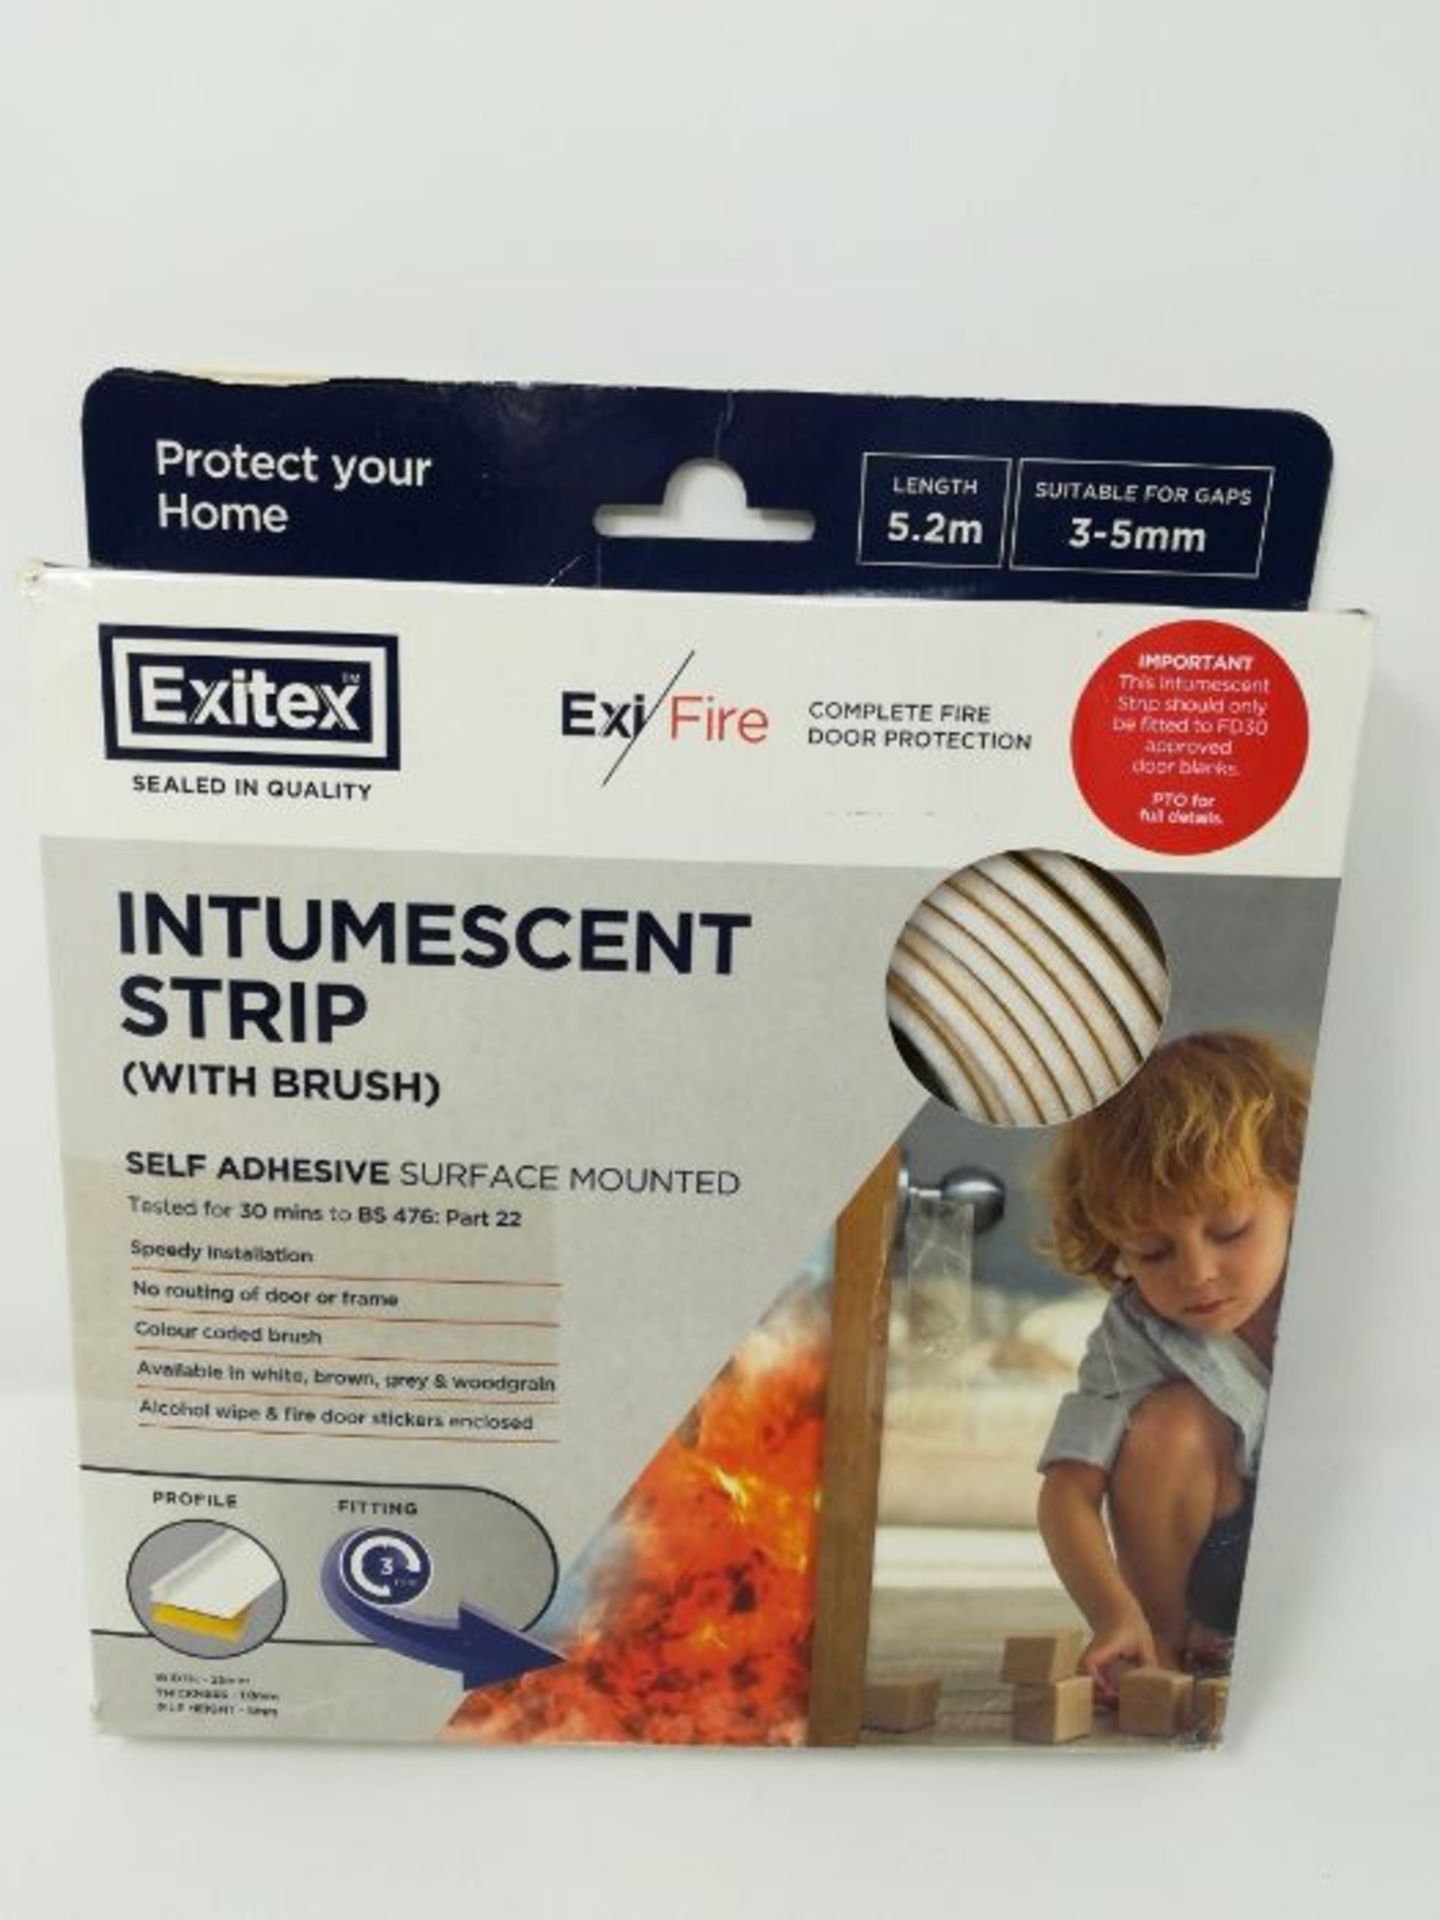 Exitex Self Adhesive Surface Mounted Intumescent Strip with brush, White, 5.2m - Image 2 of 3